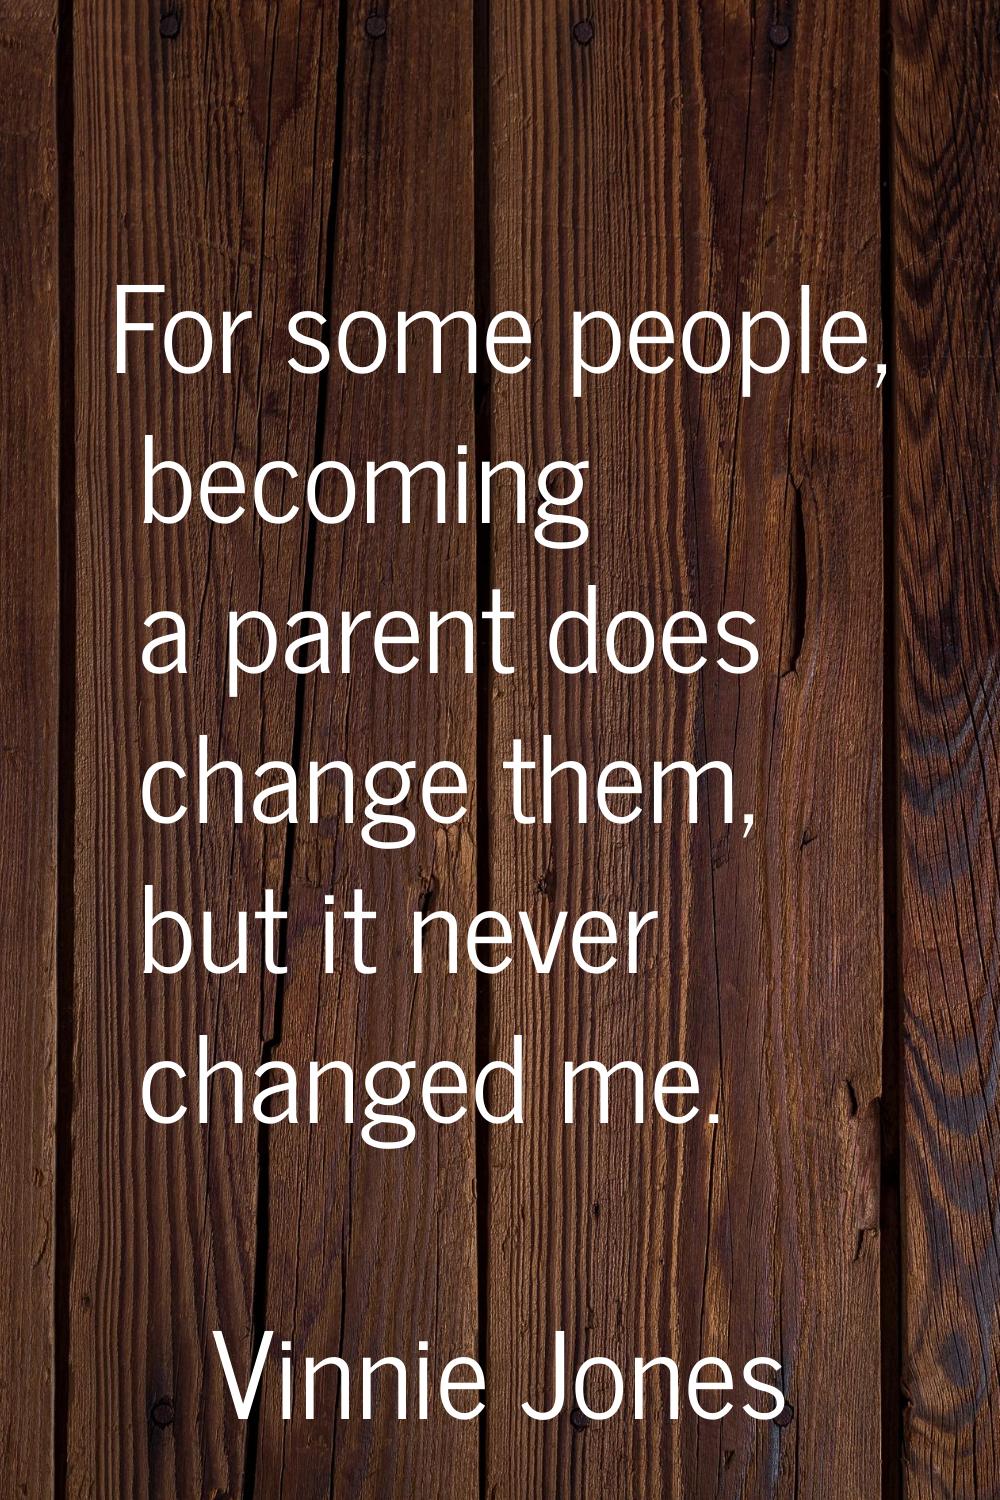 For some people, becoming a parent does change them, but it never changed me.